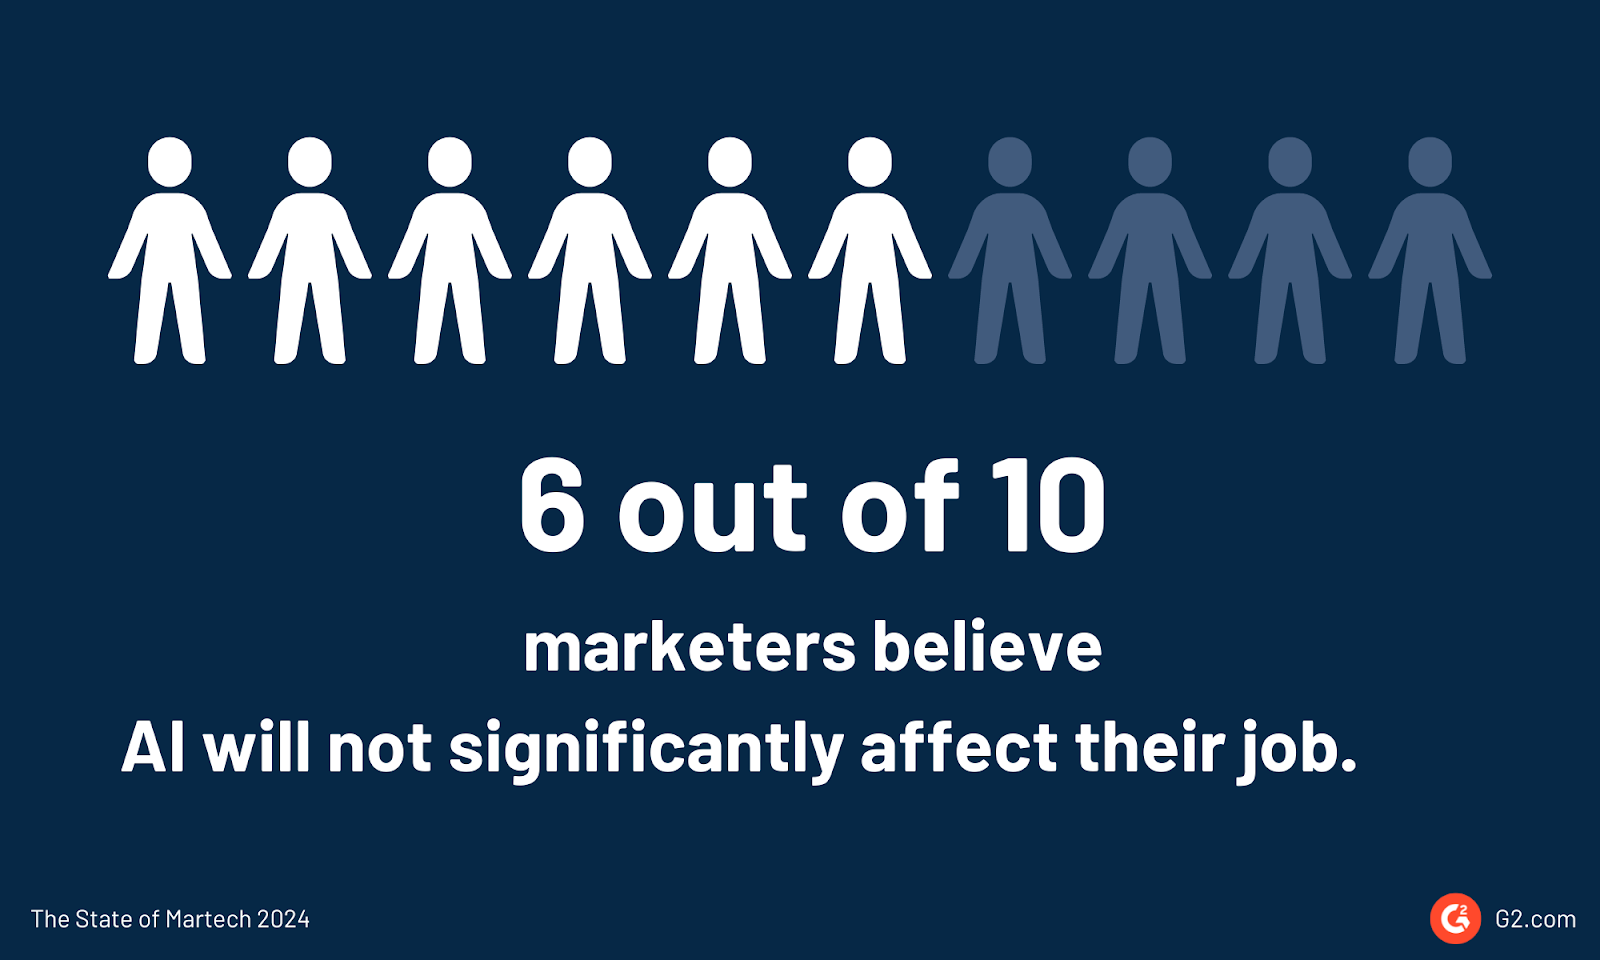 marketers don't fear job loss due to AI